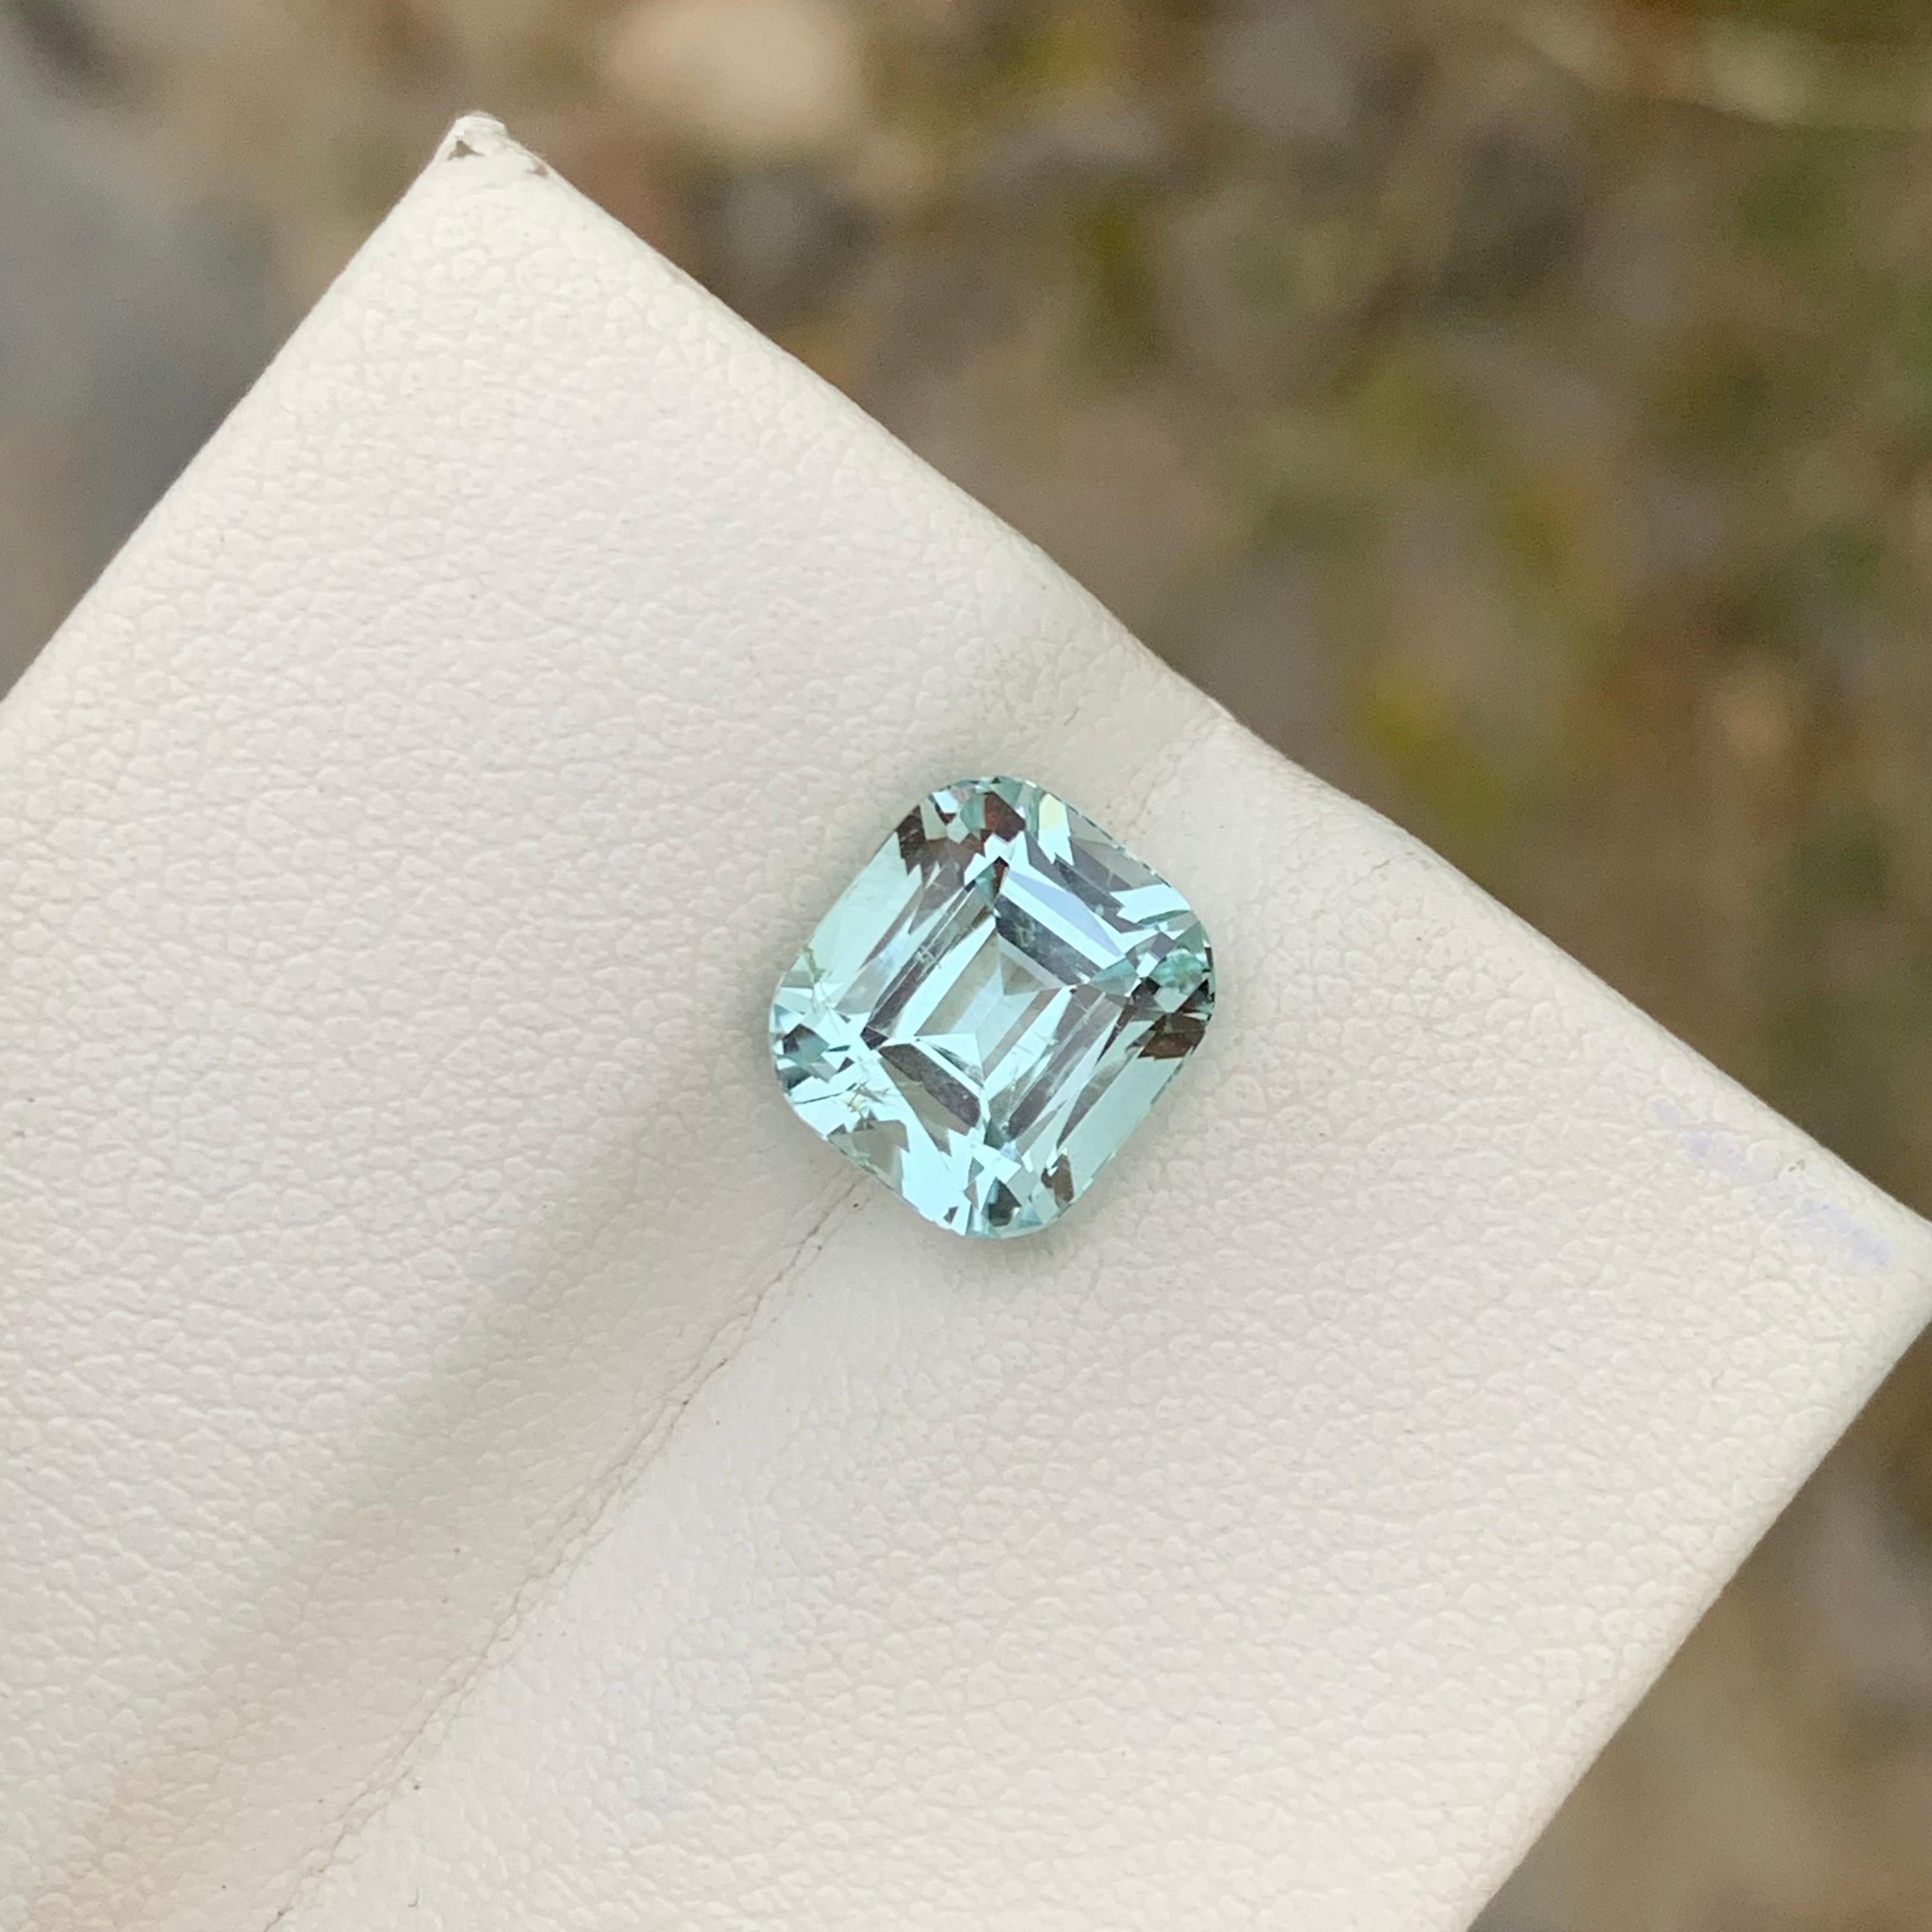 3.55 Carats Natural Loose Aquamarine Ring Gem From Shigar Valley Mine For Sale 1